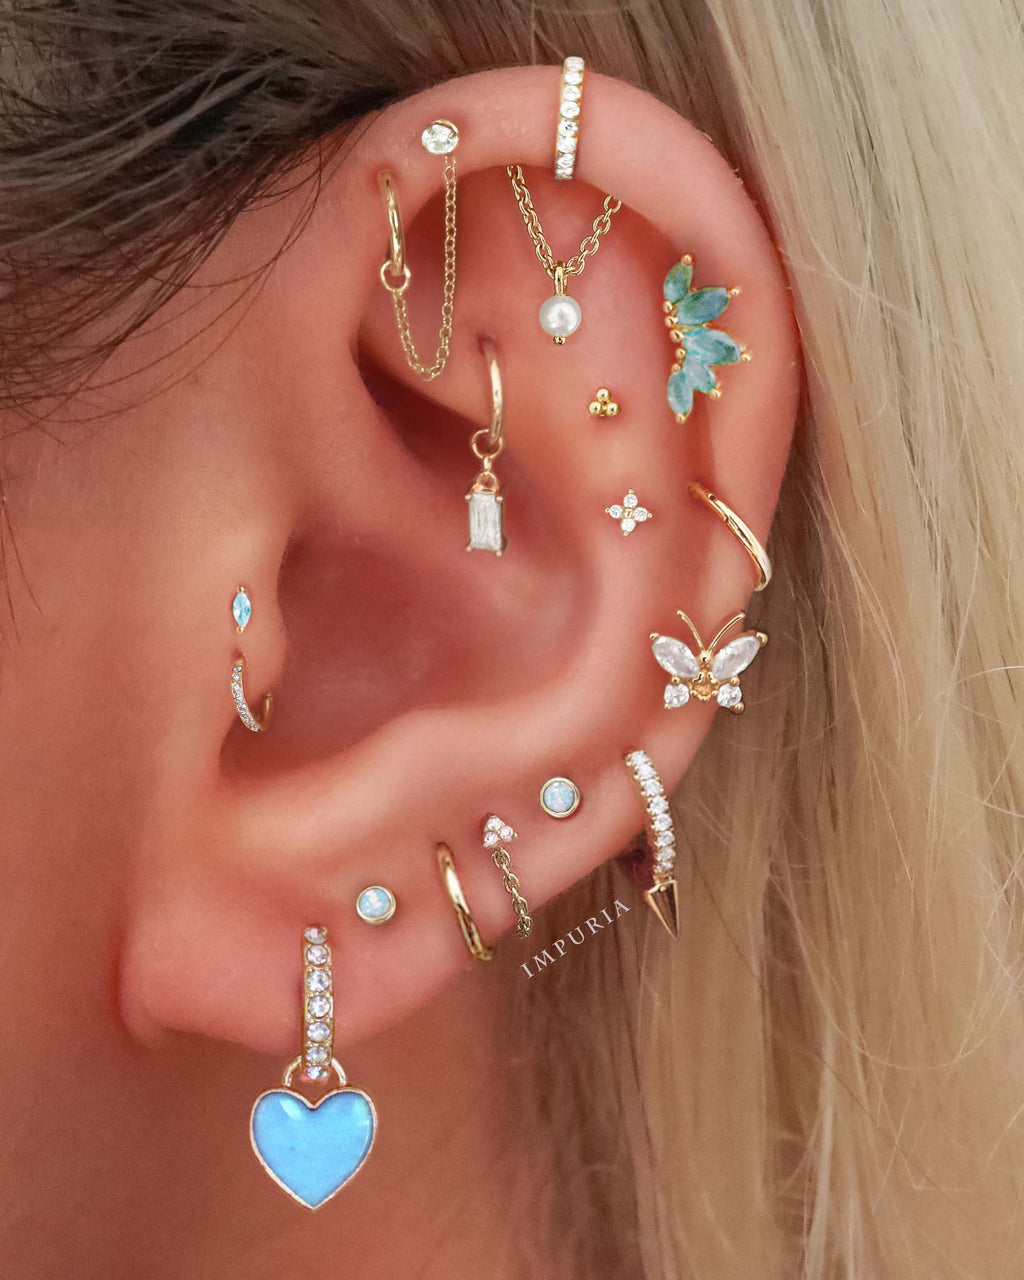 How to Put Hoop Earrings In: Tips and Advice | Monica Vinader